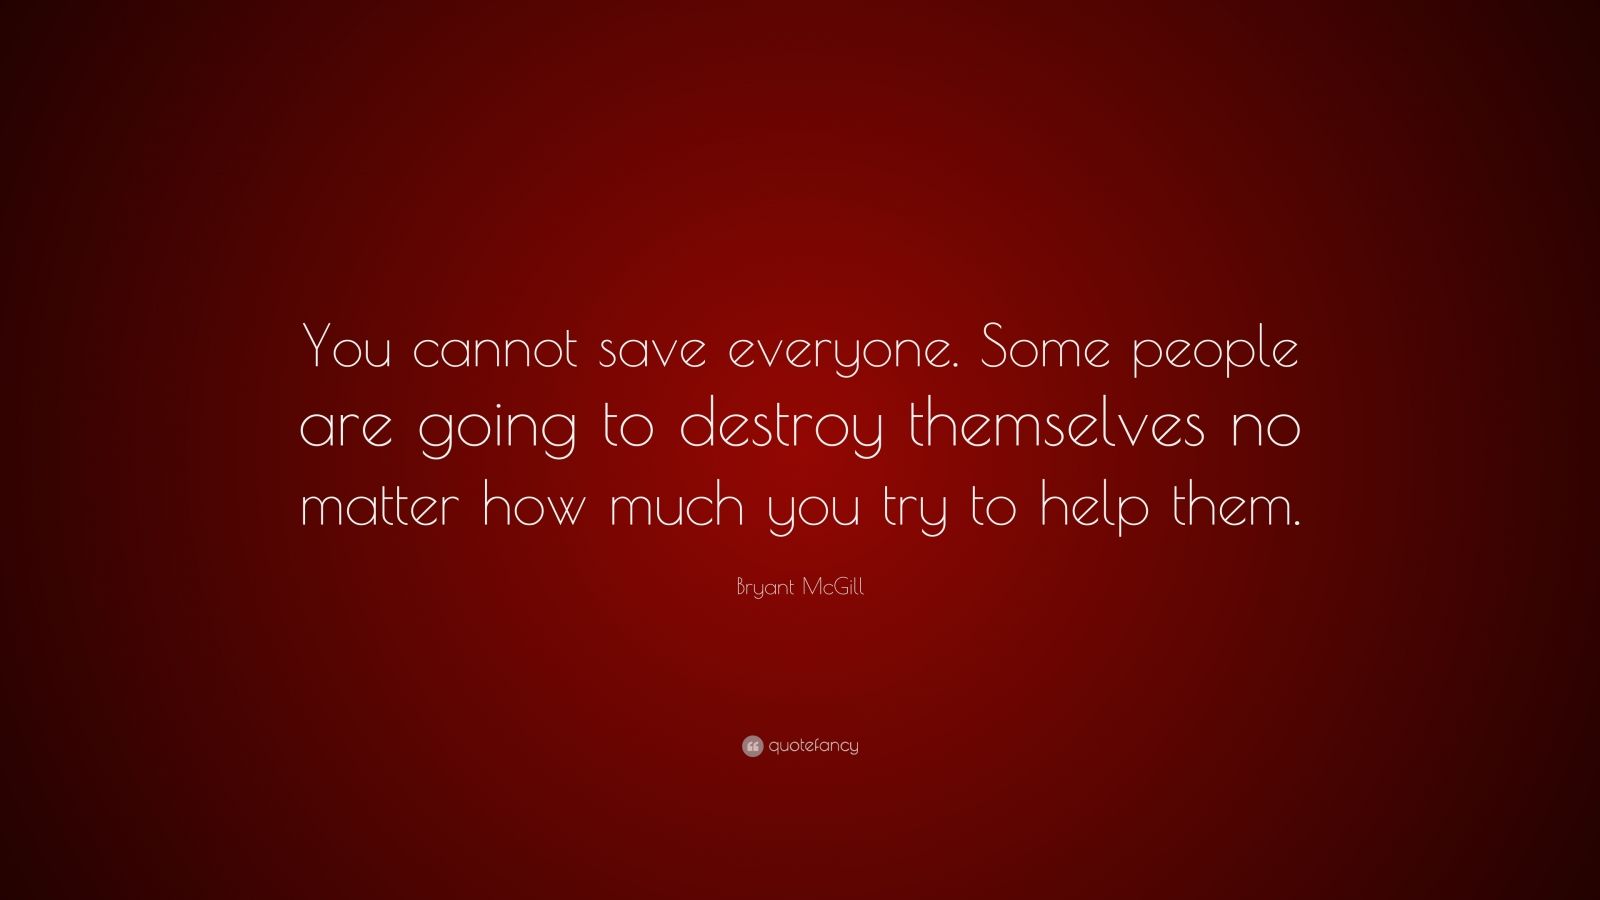 Bryant McGill Quote: “You cannot save everyone. Some people are going ...